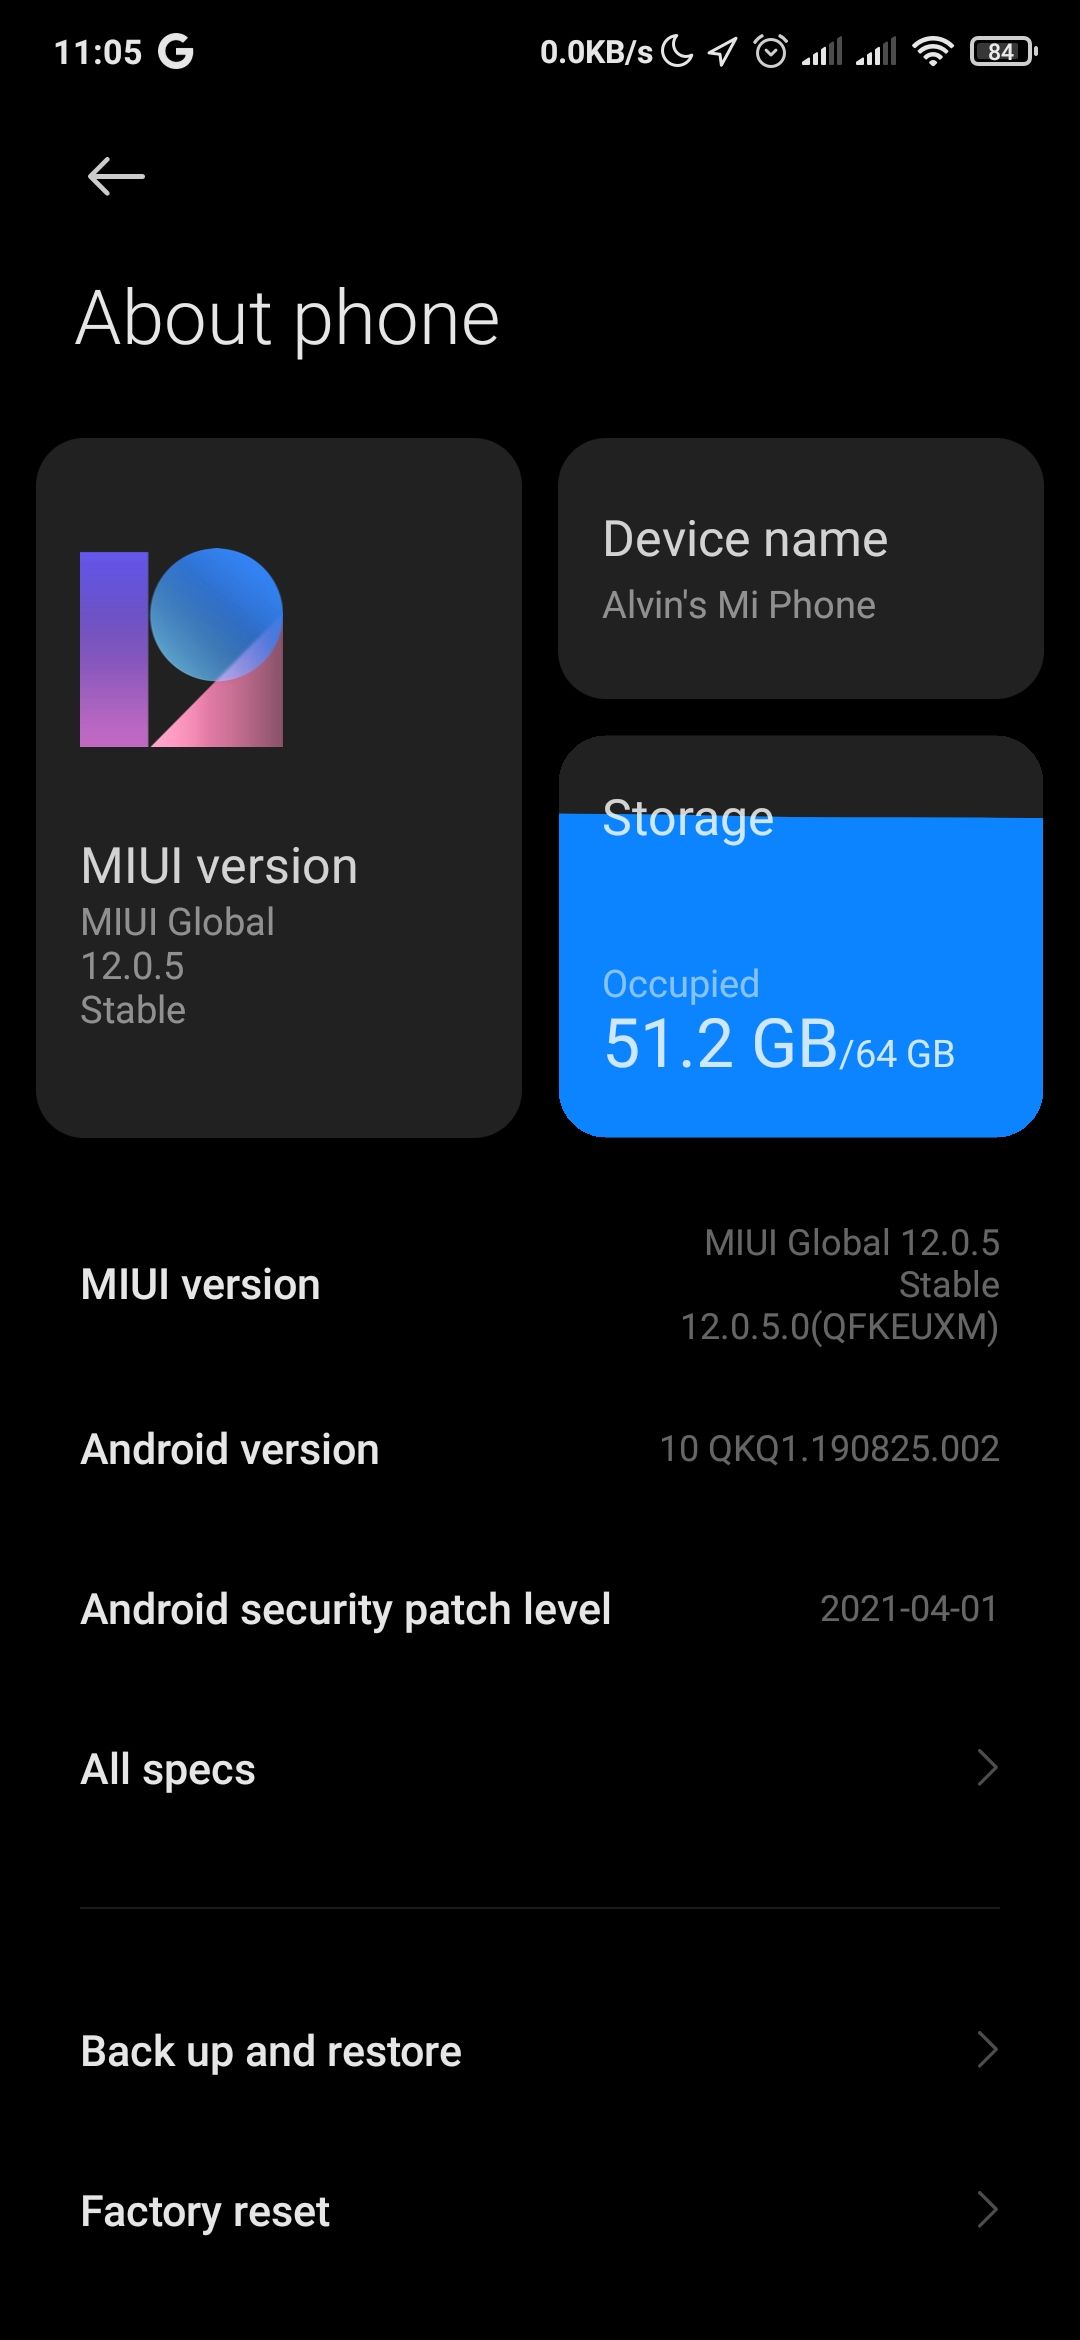 Storage space overview on MIUI custom Android ROM